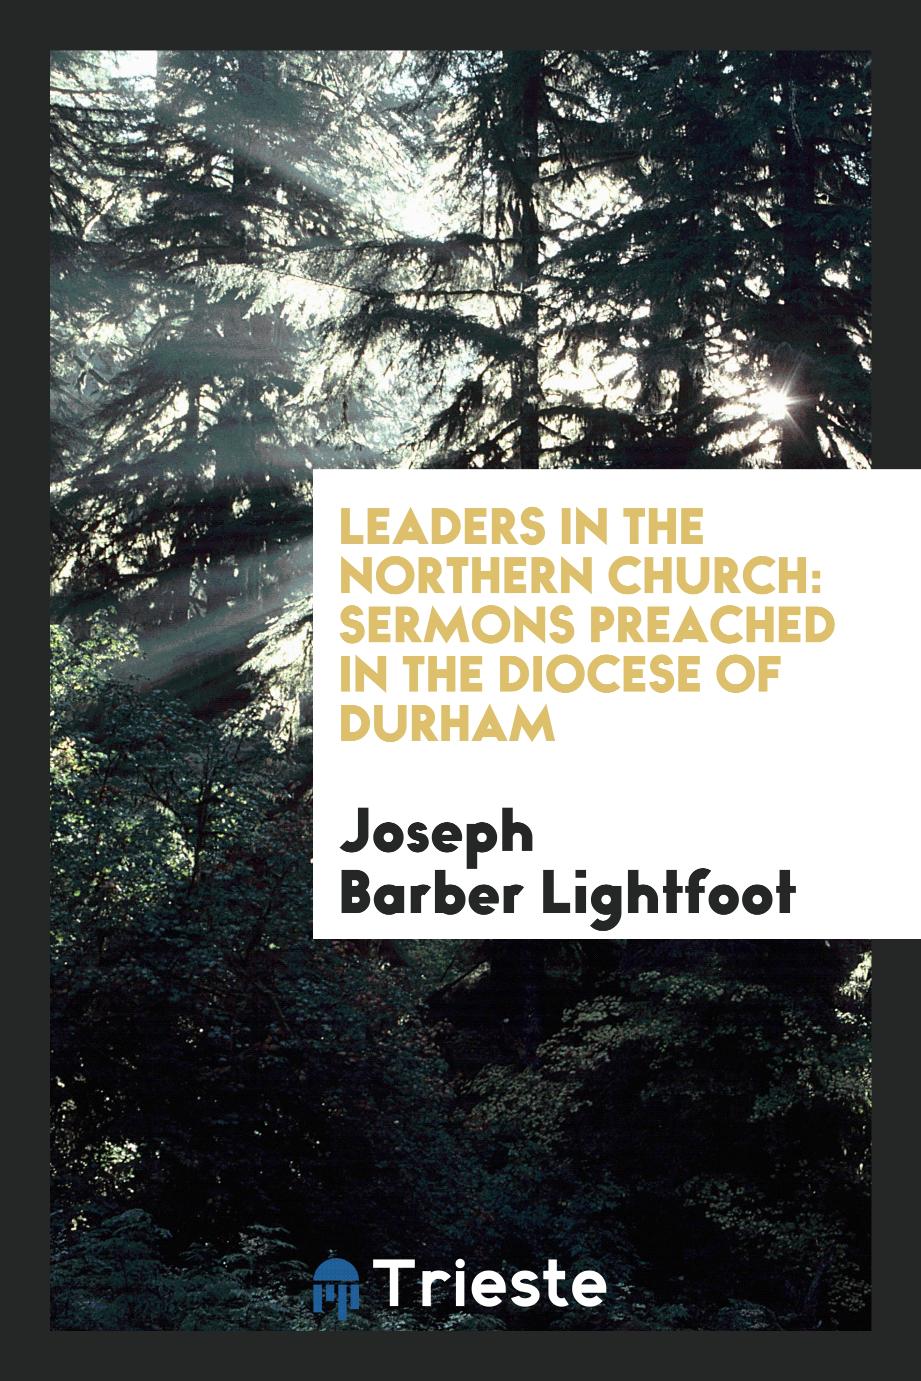 Leaders in the northern church: sermons preached in the diocese of Durham